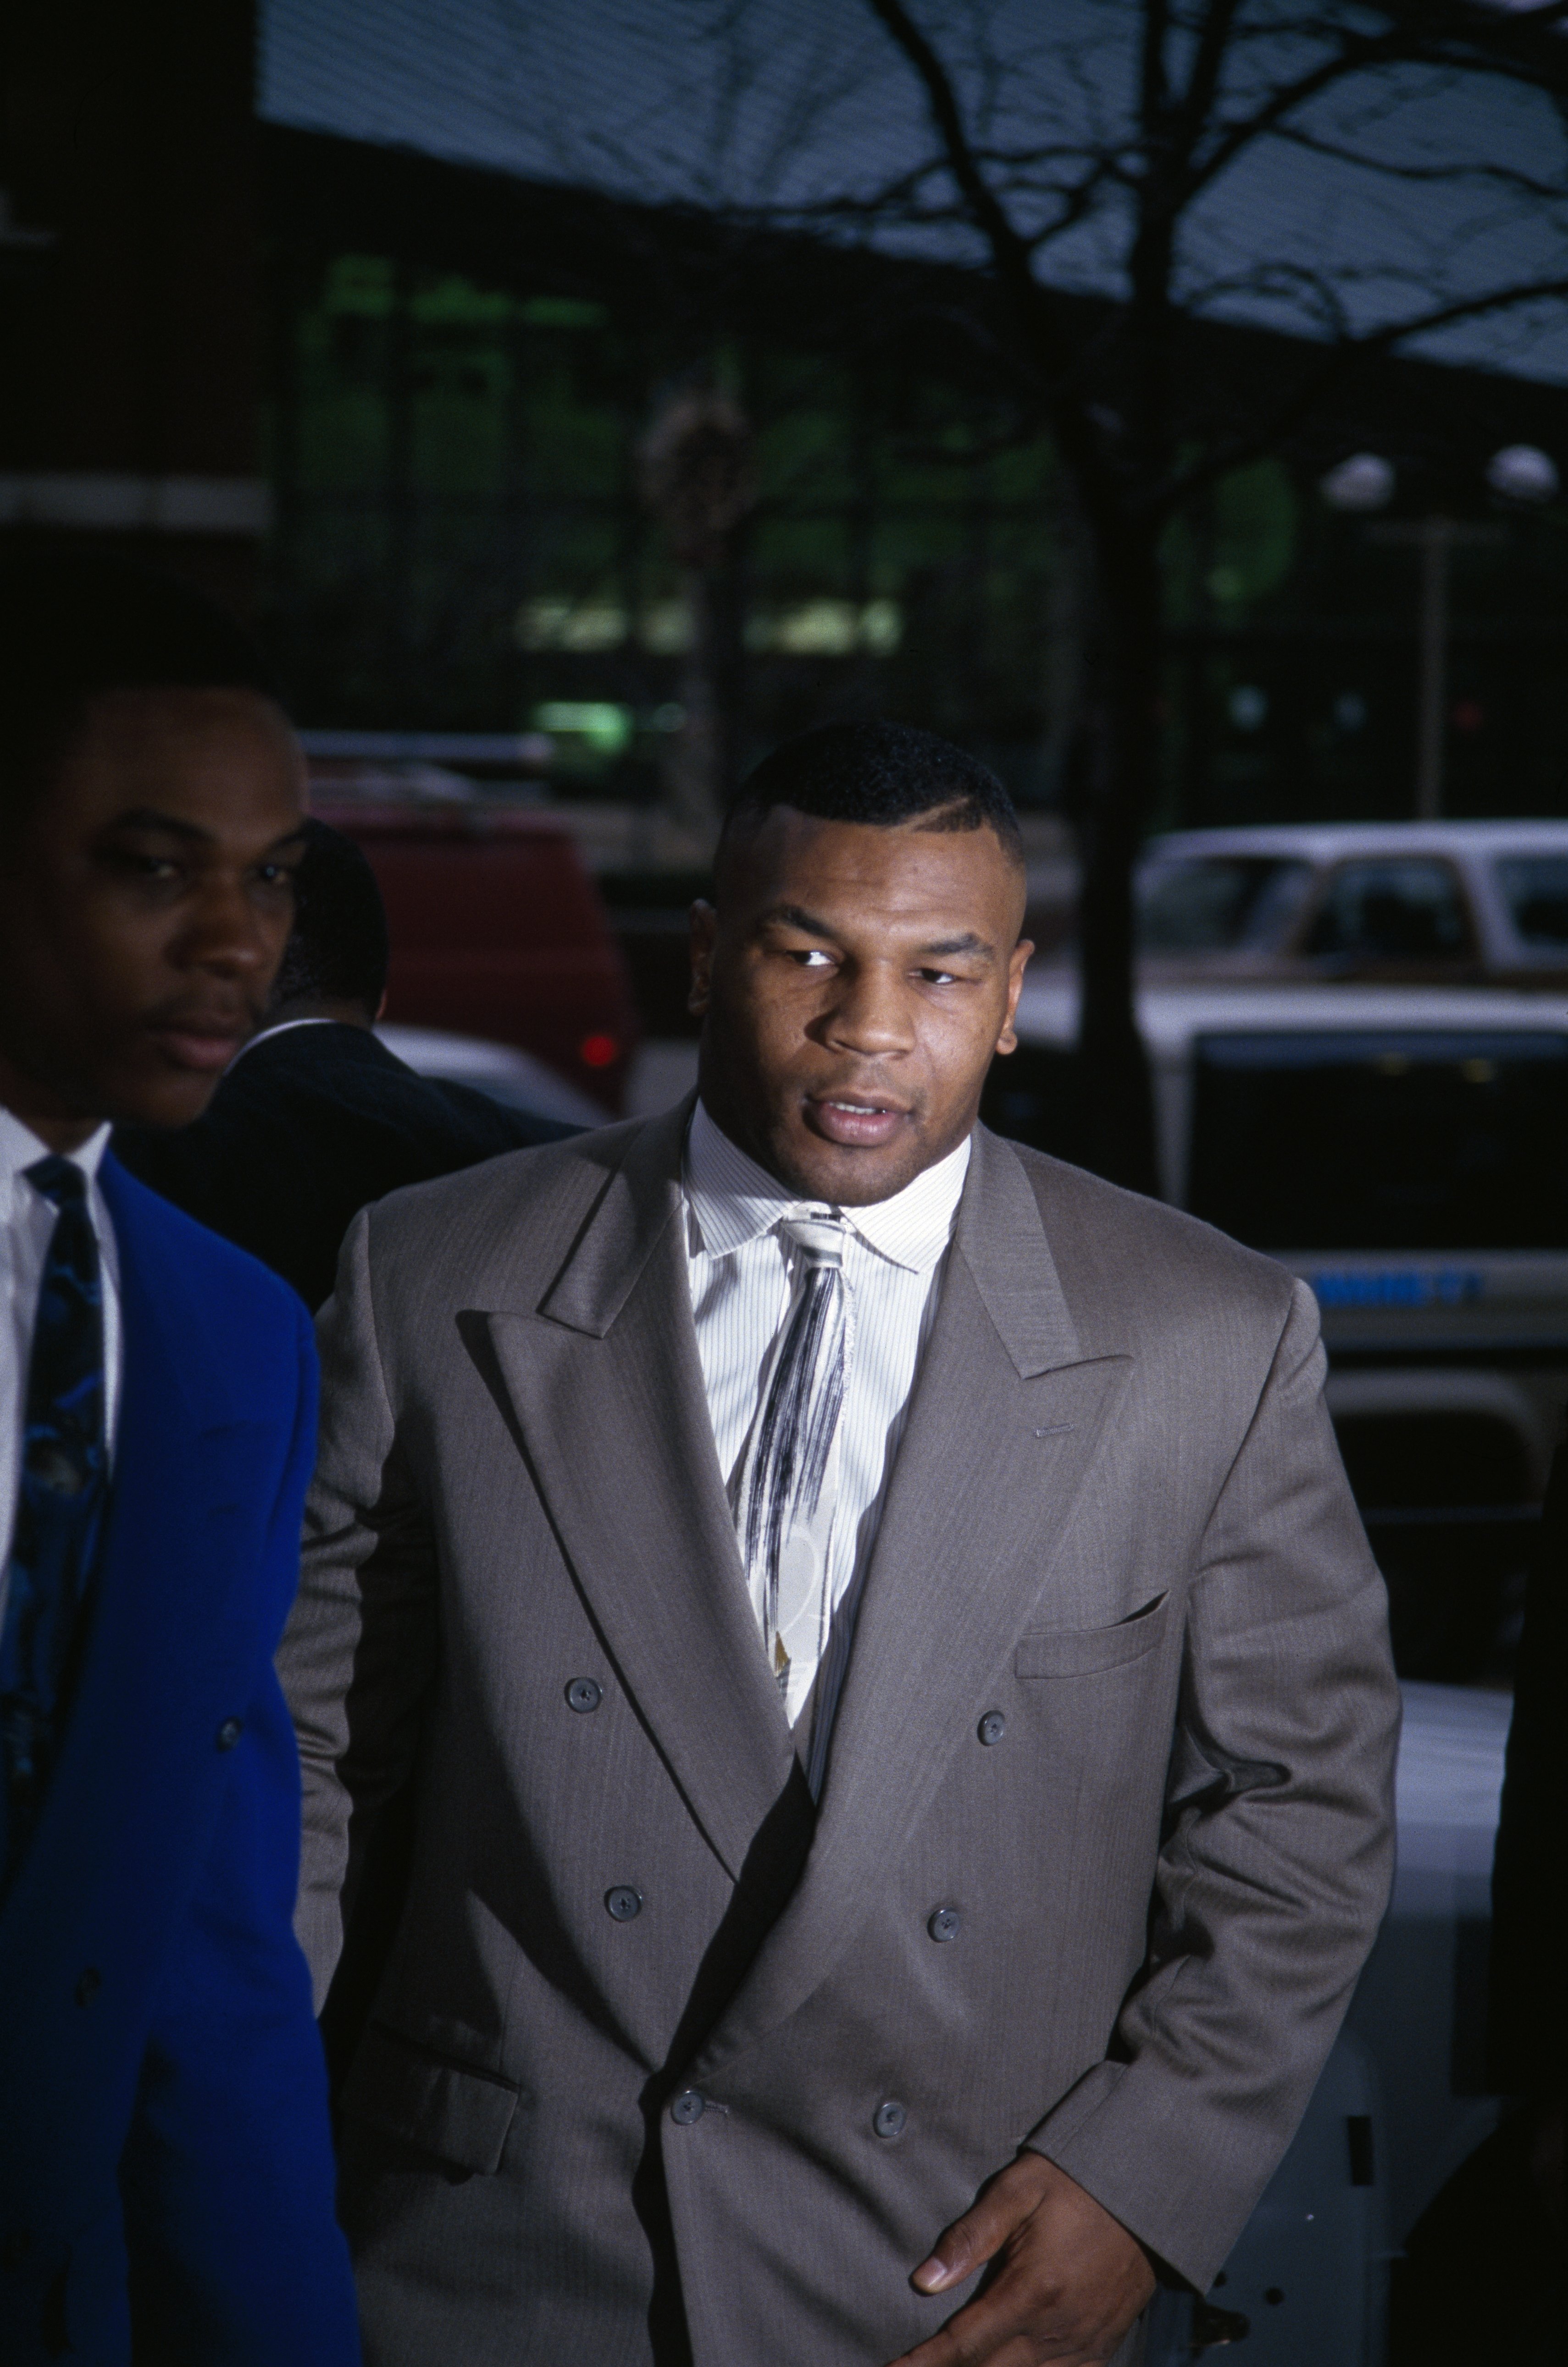  Mike Tyson arriving at the Marion County Courthouse in February 1992. | Source: Getty Images